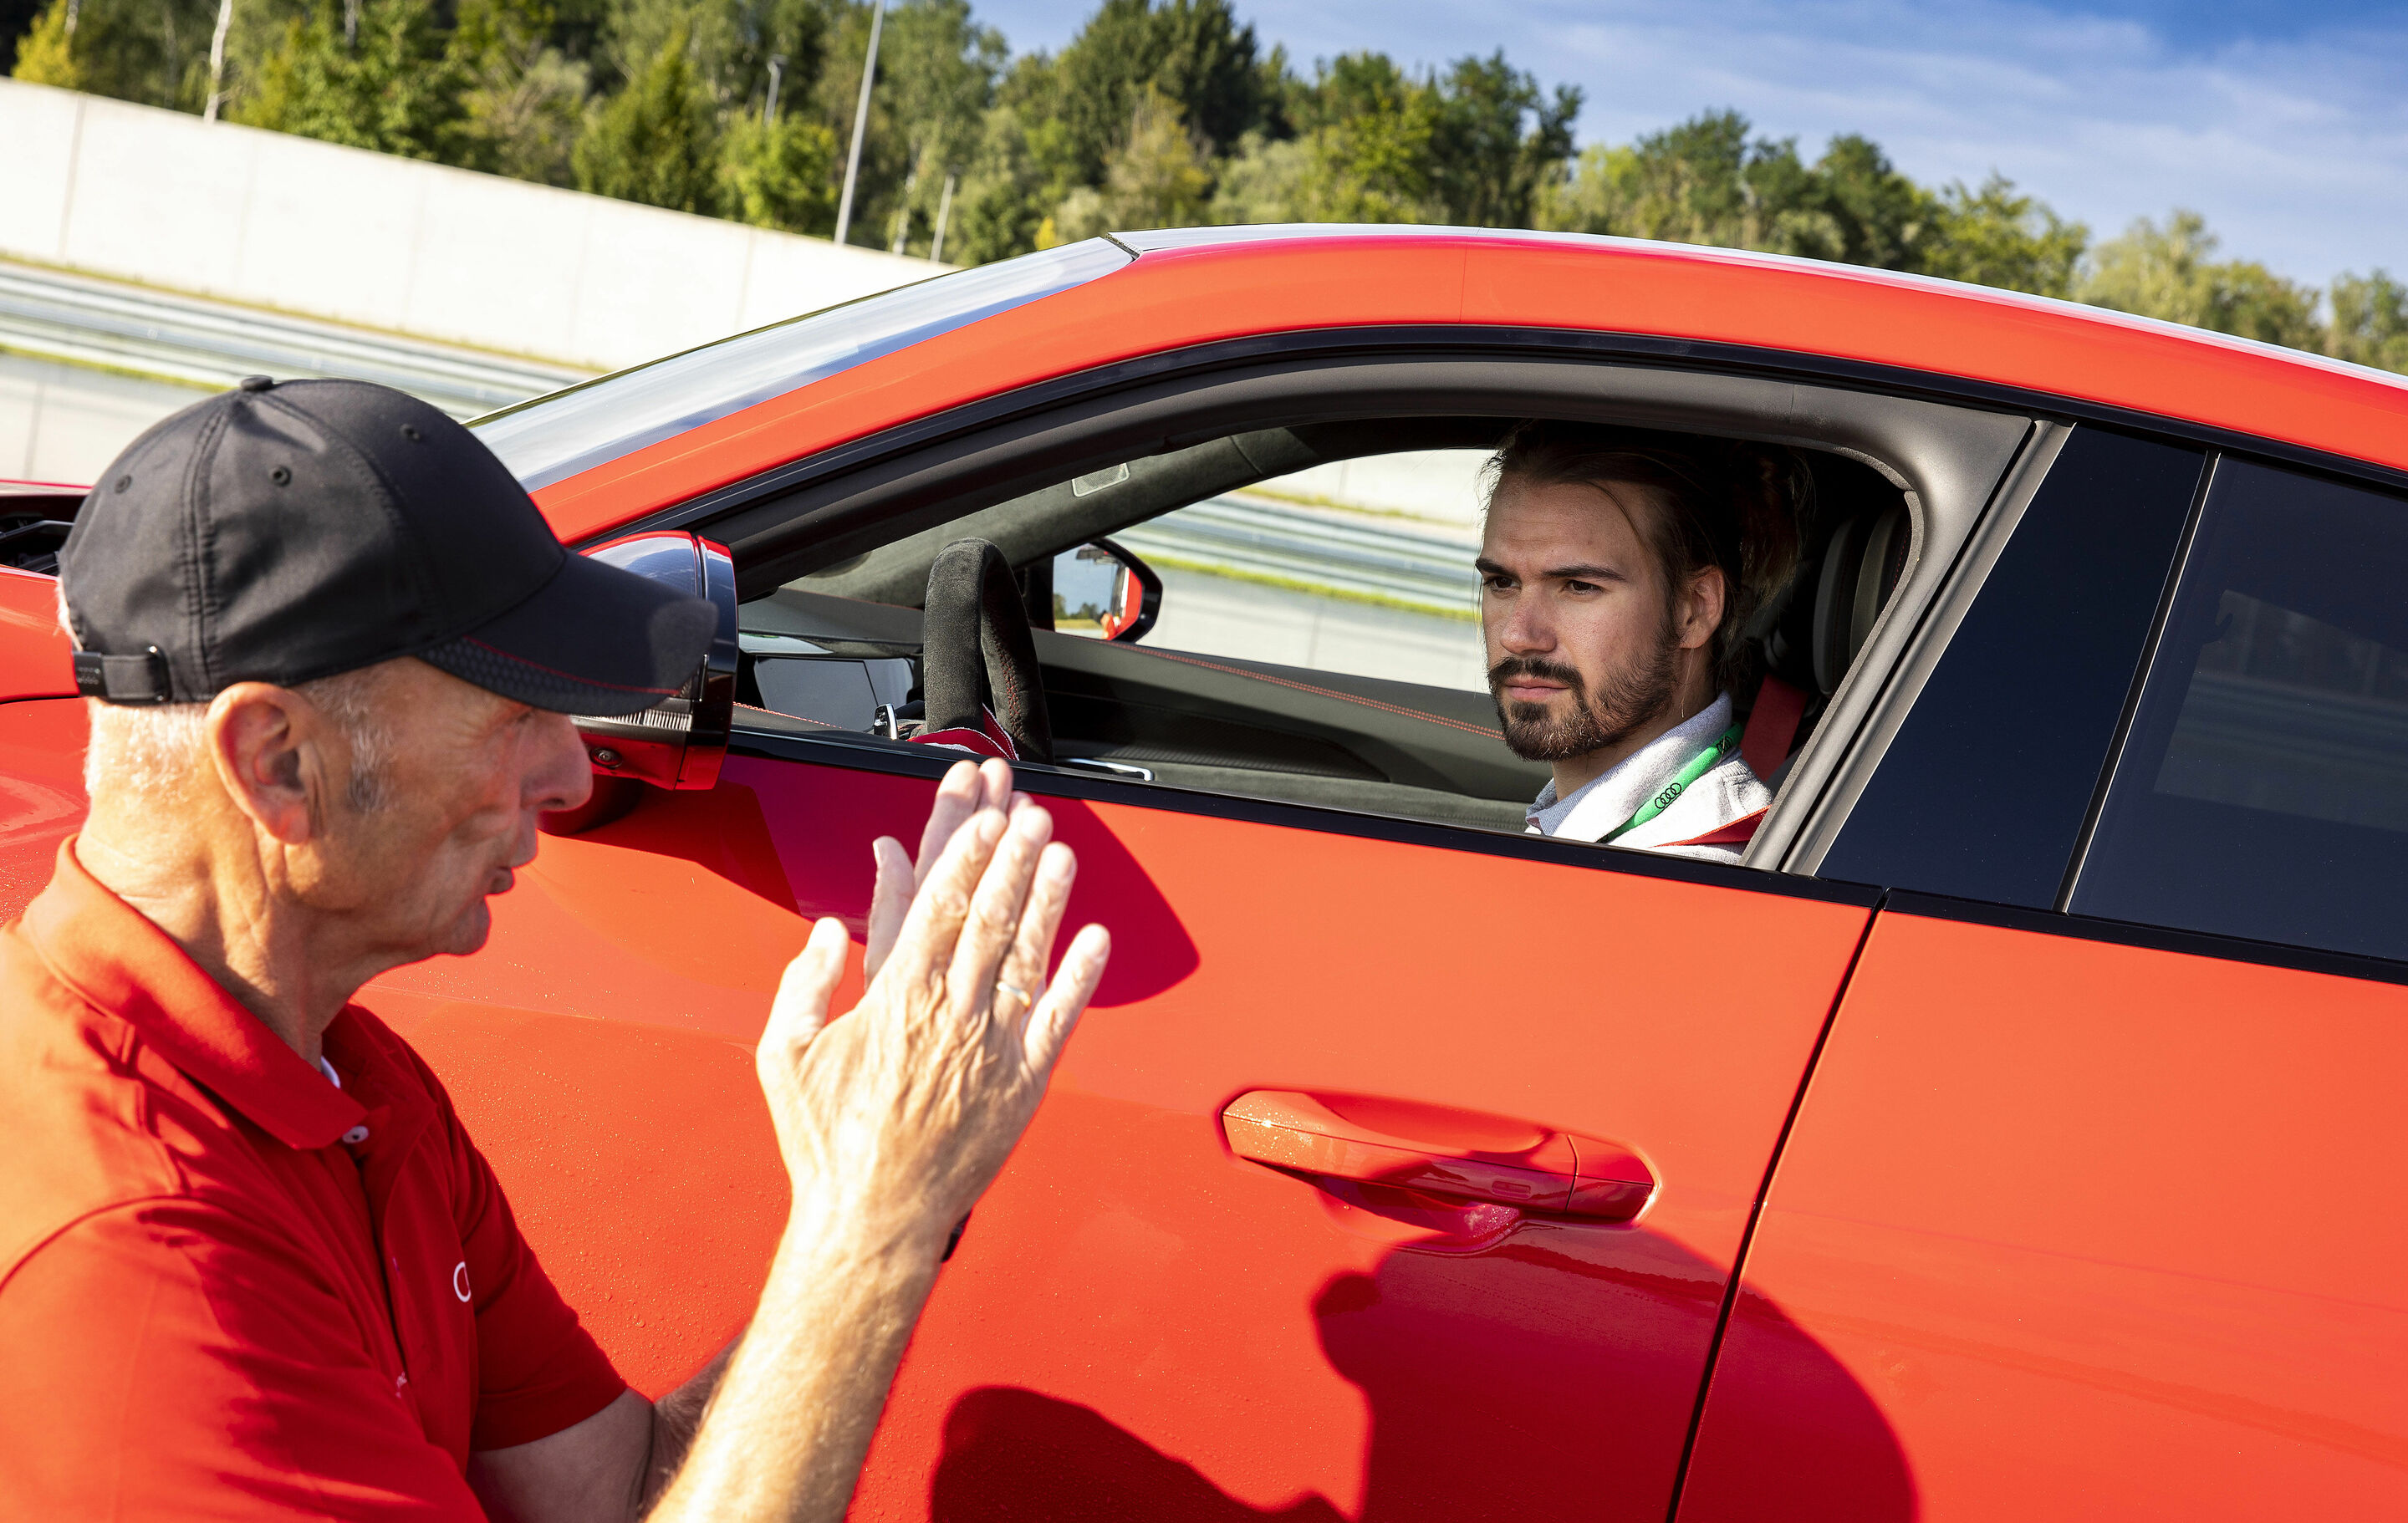 Ingolstadt’s ice hockey team tests top sport models from Audi